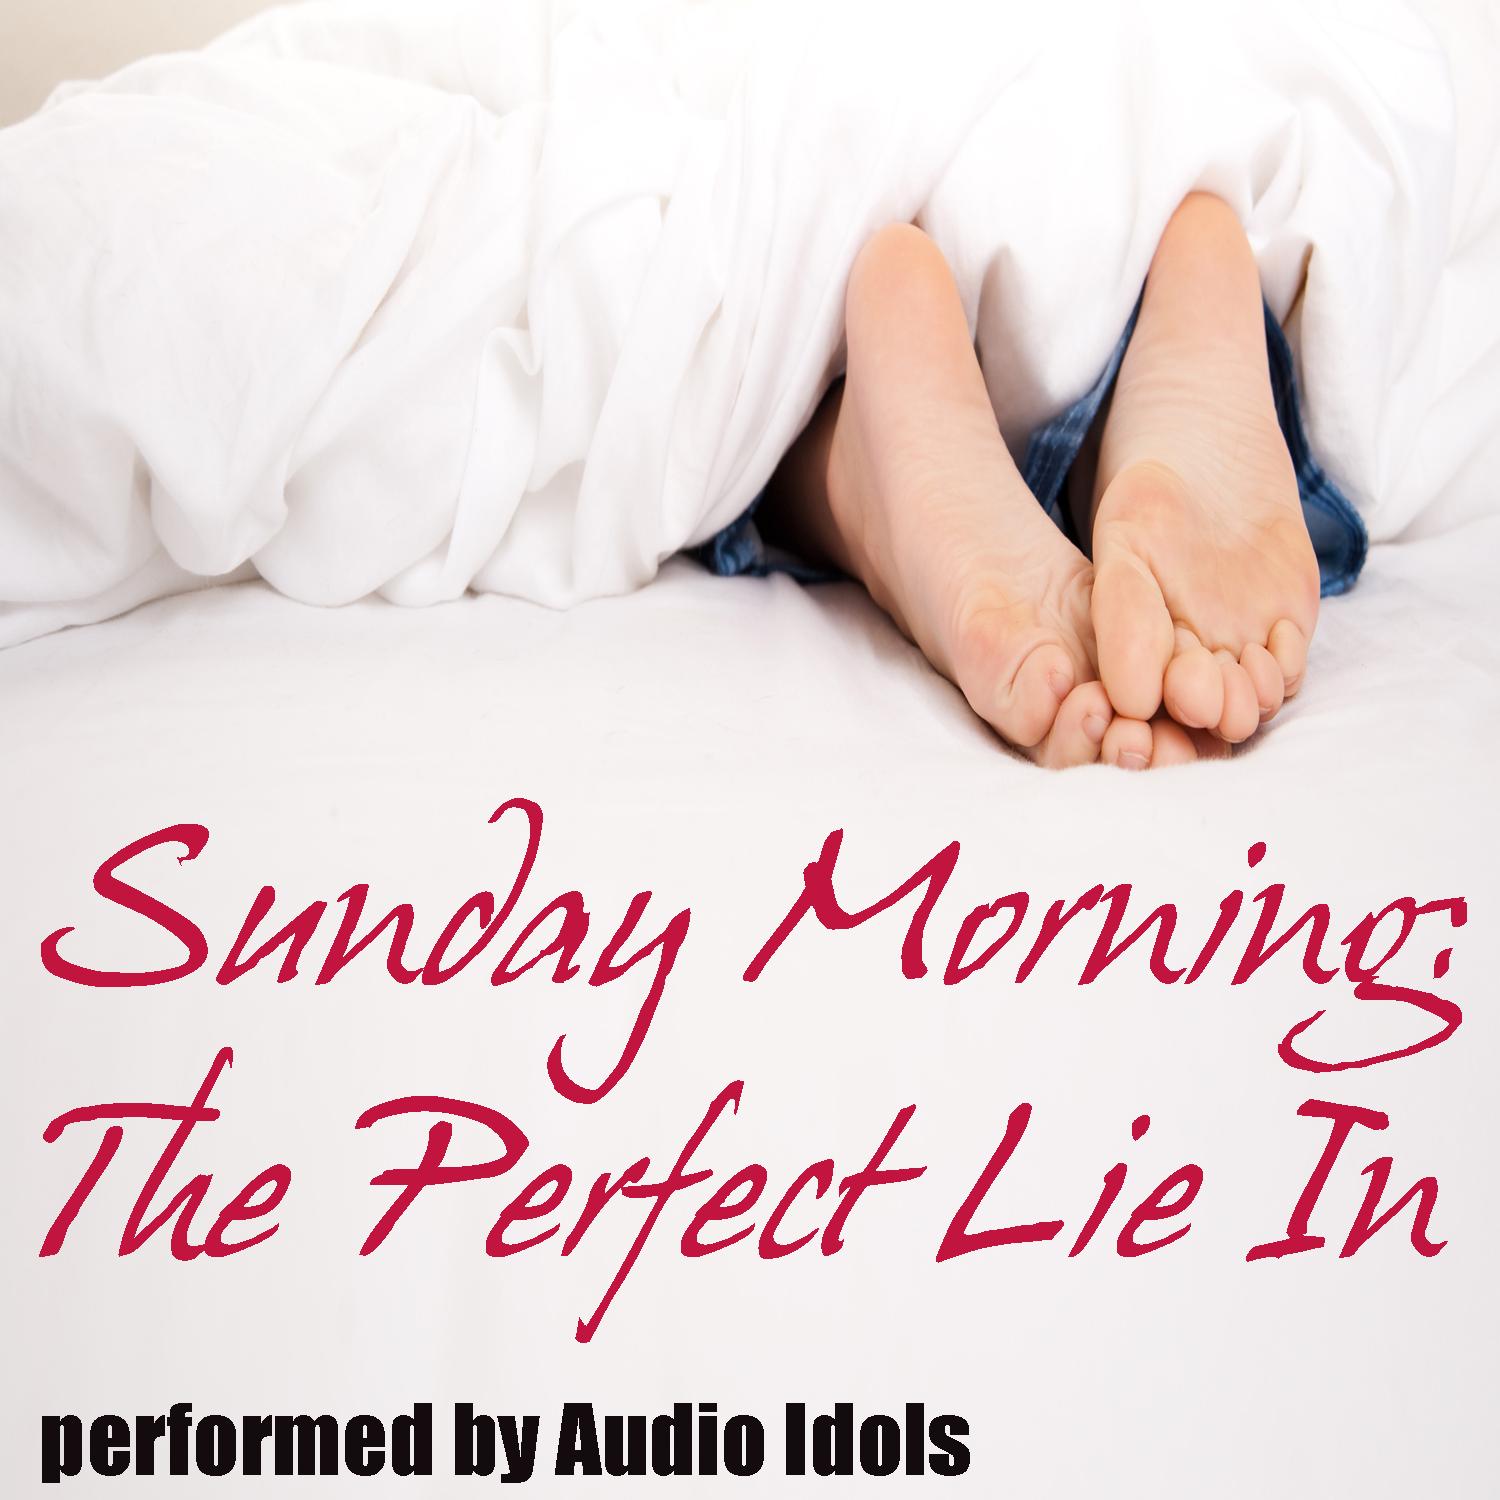 Sunday Morning: The Perfect Lie In